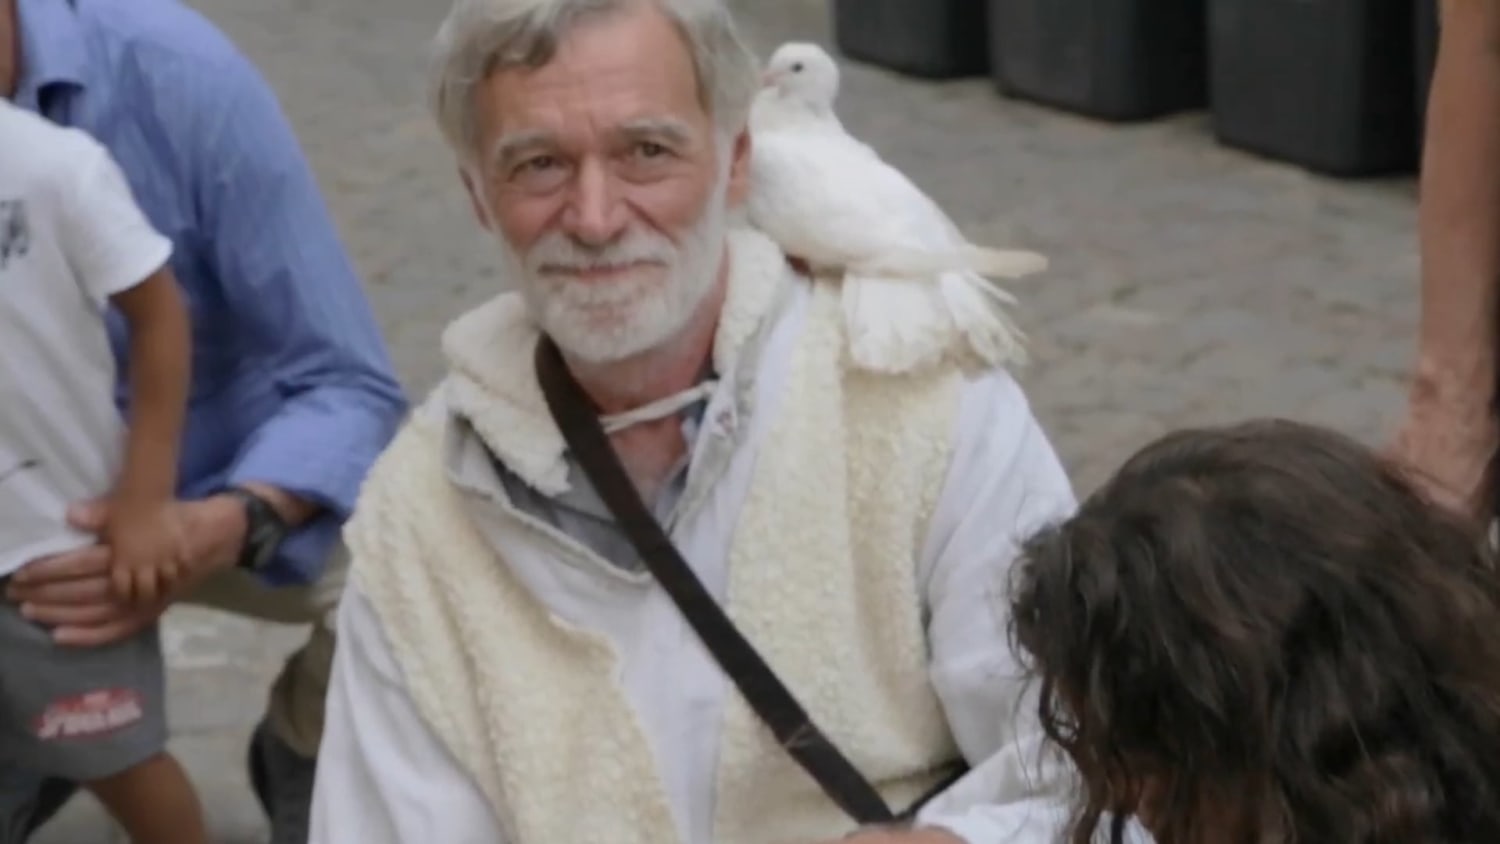 For the last 30 years this man has been taking his animals to a medieval festival for adults and children to meet. The animals aren't caged or tethered